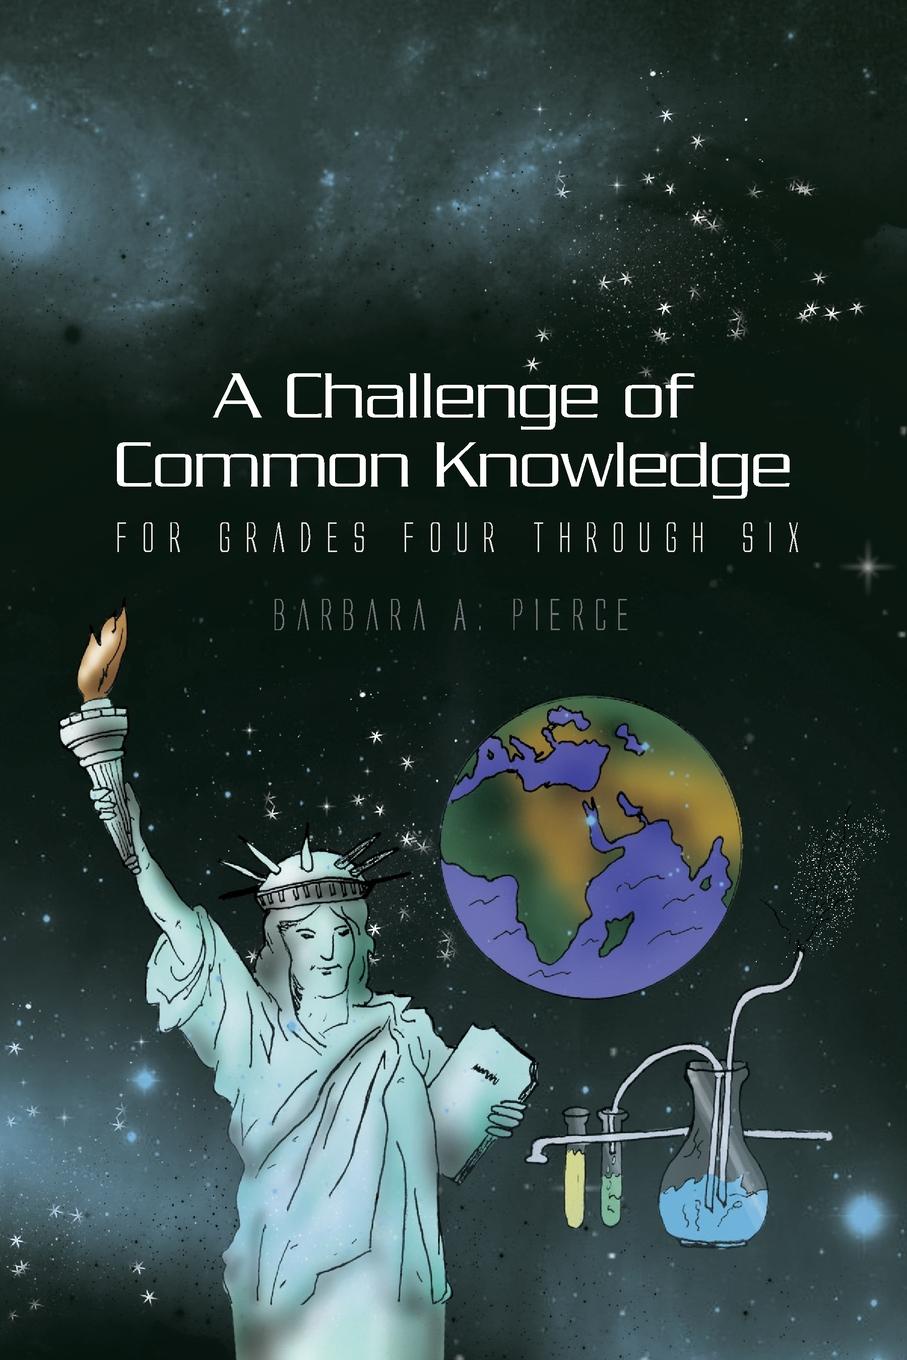 A Challenge of Common Knowledge. For Grades Four Through Six